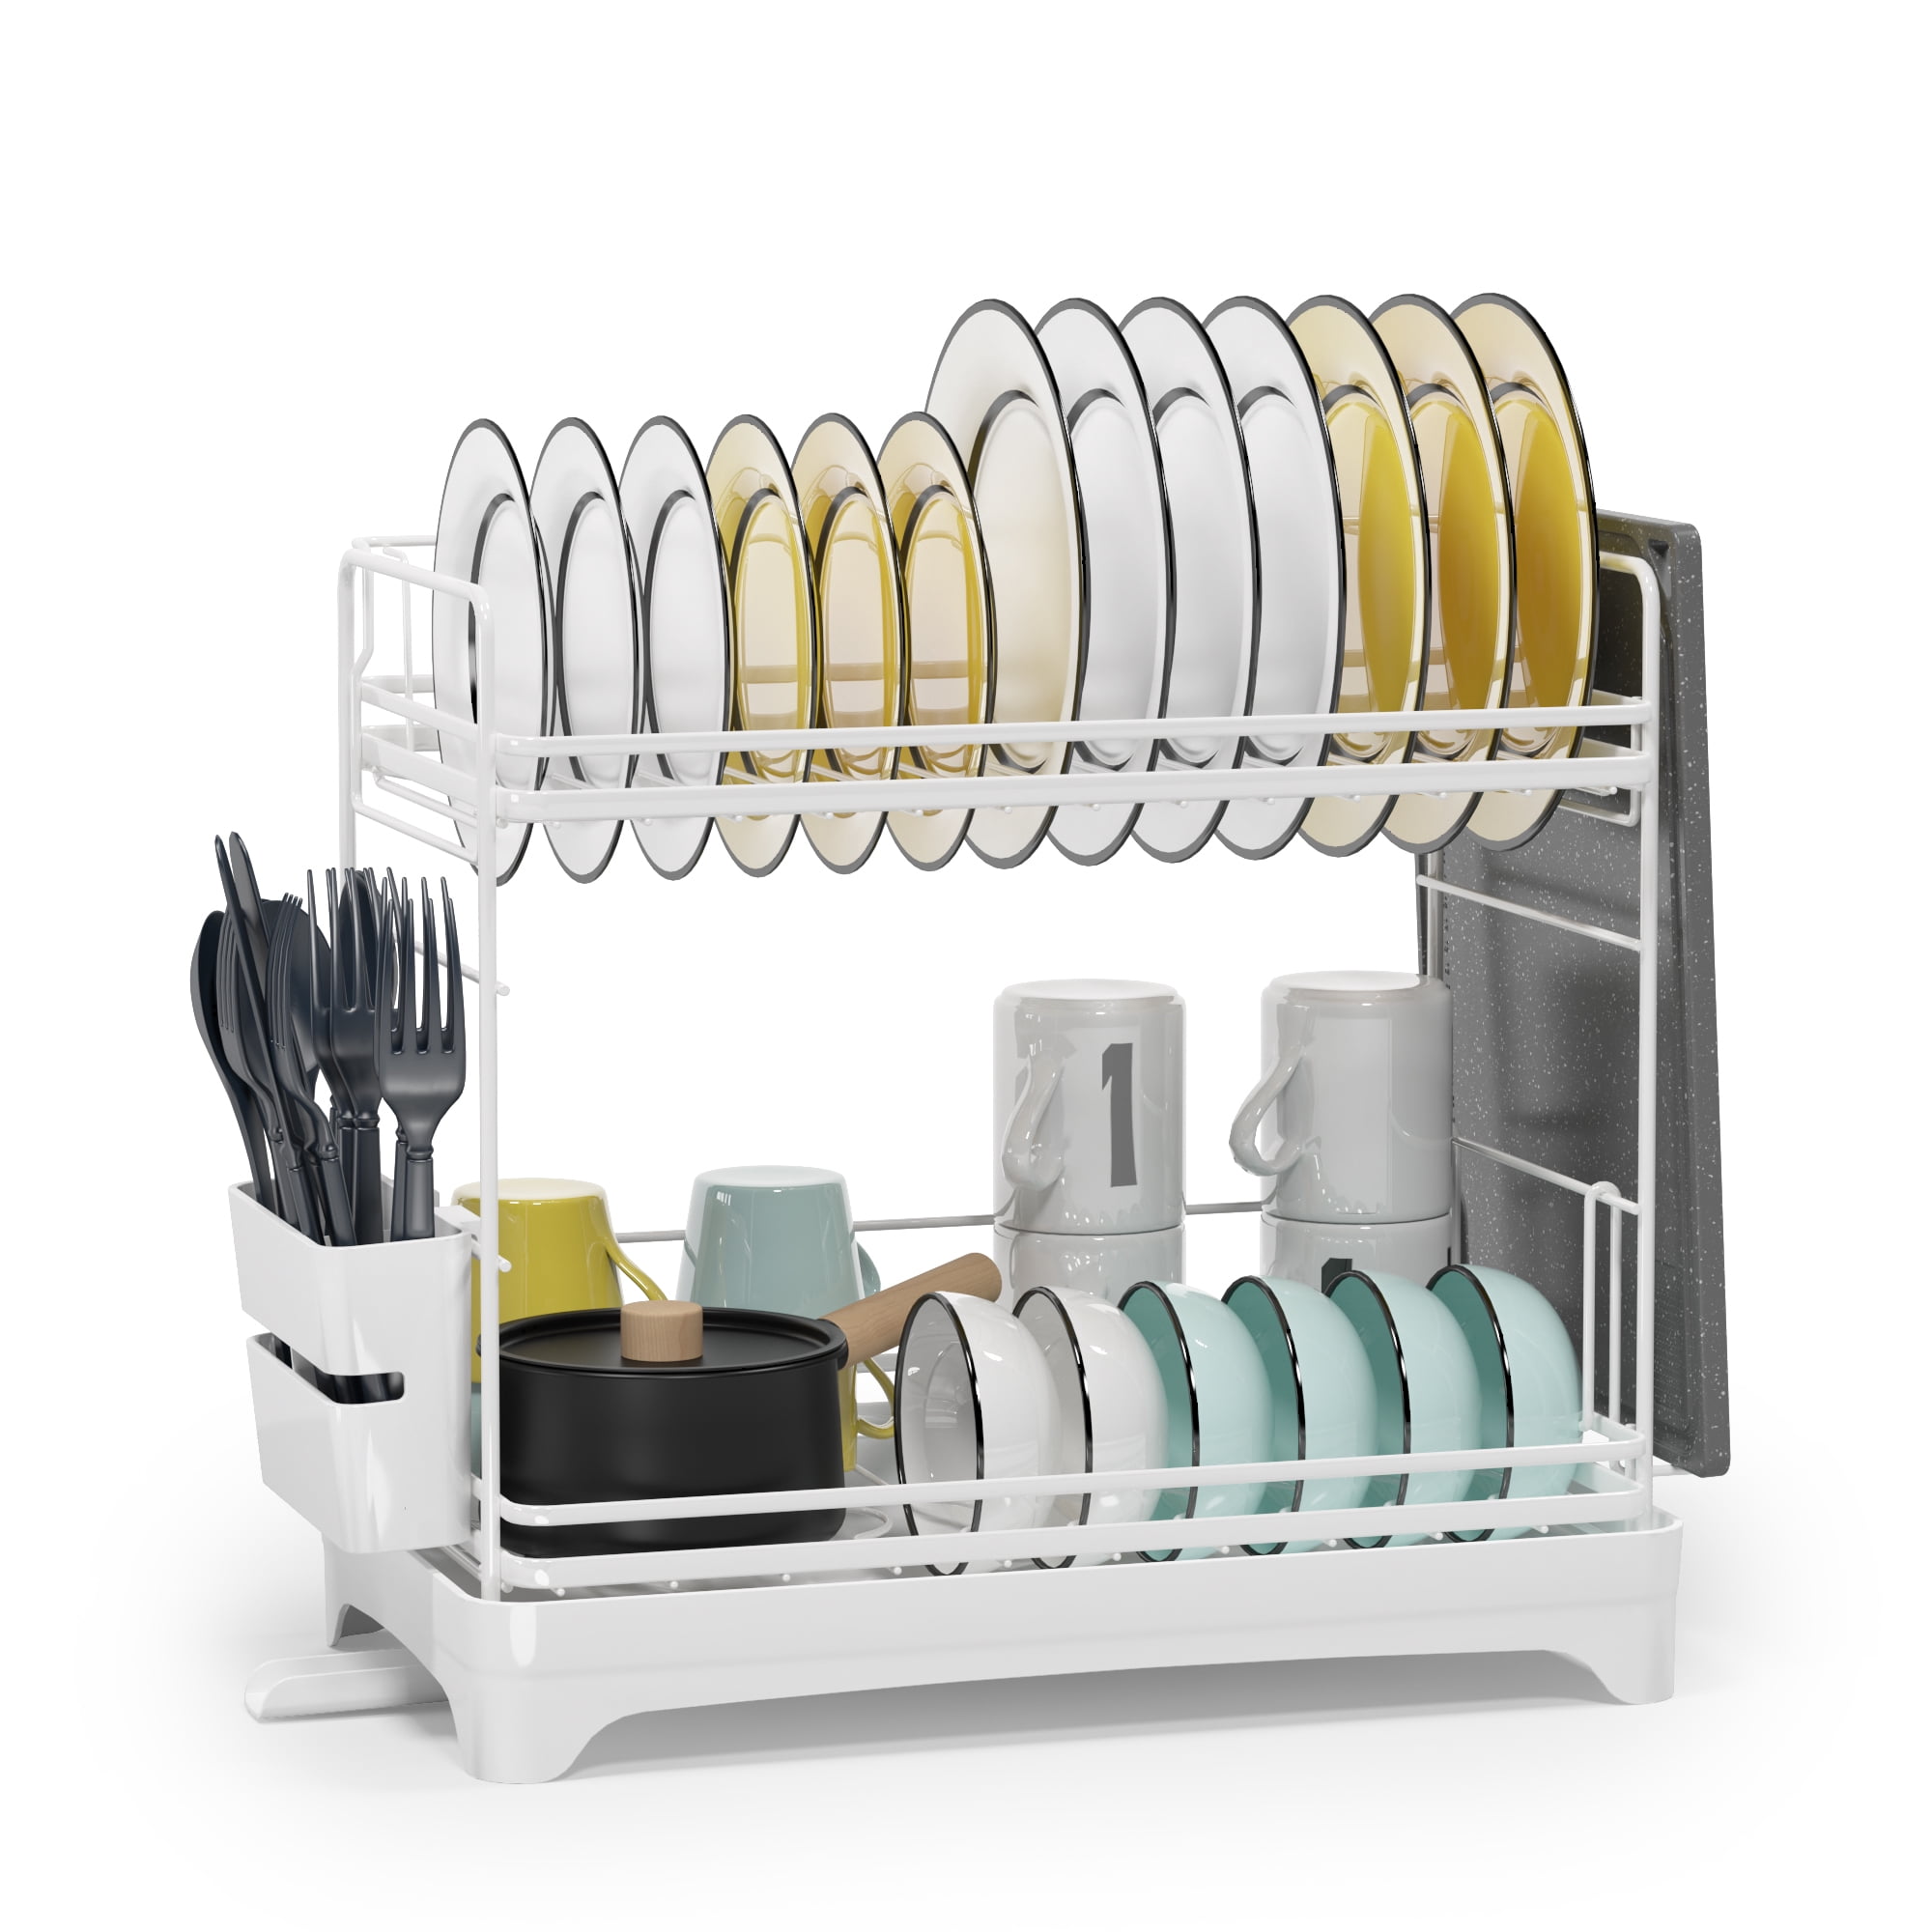 Aonee Dish Drying Rack, 2 Tier Dish Rack with Water Locking Function  Drainboard, Pot Rack, Cutlery Holder, Cutting-Board Holder and Cup Holder,  Large